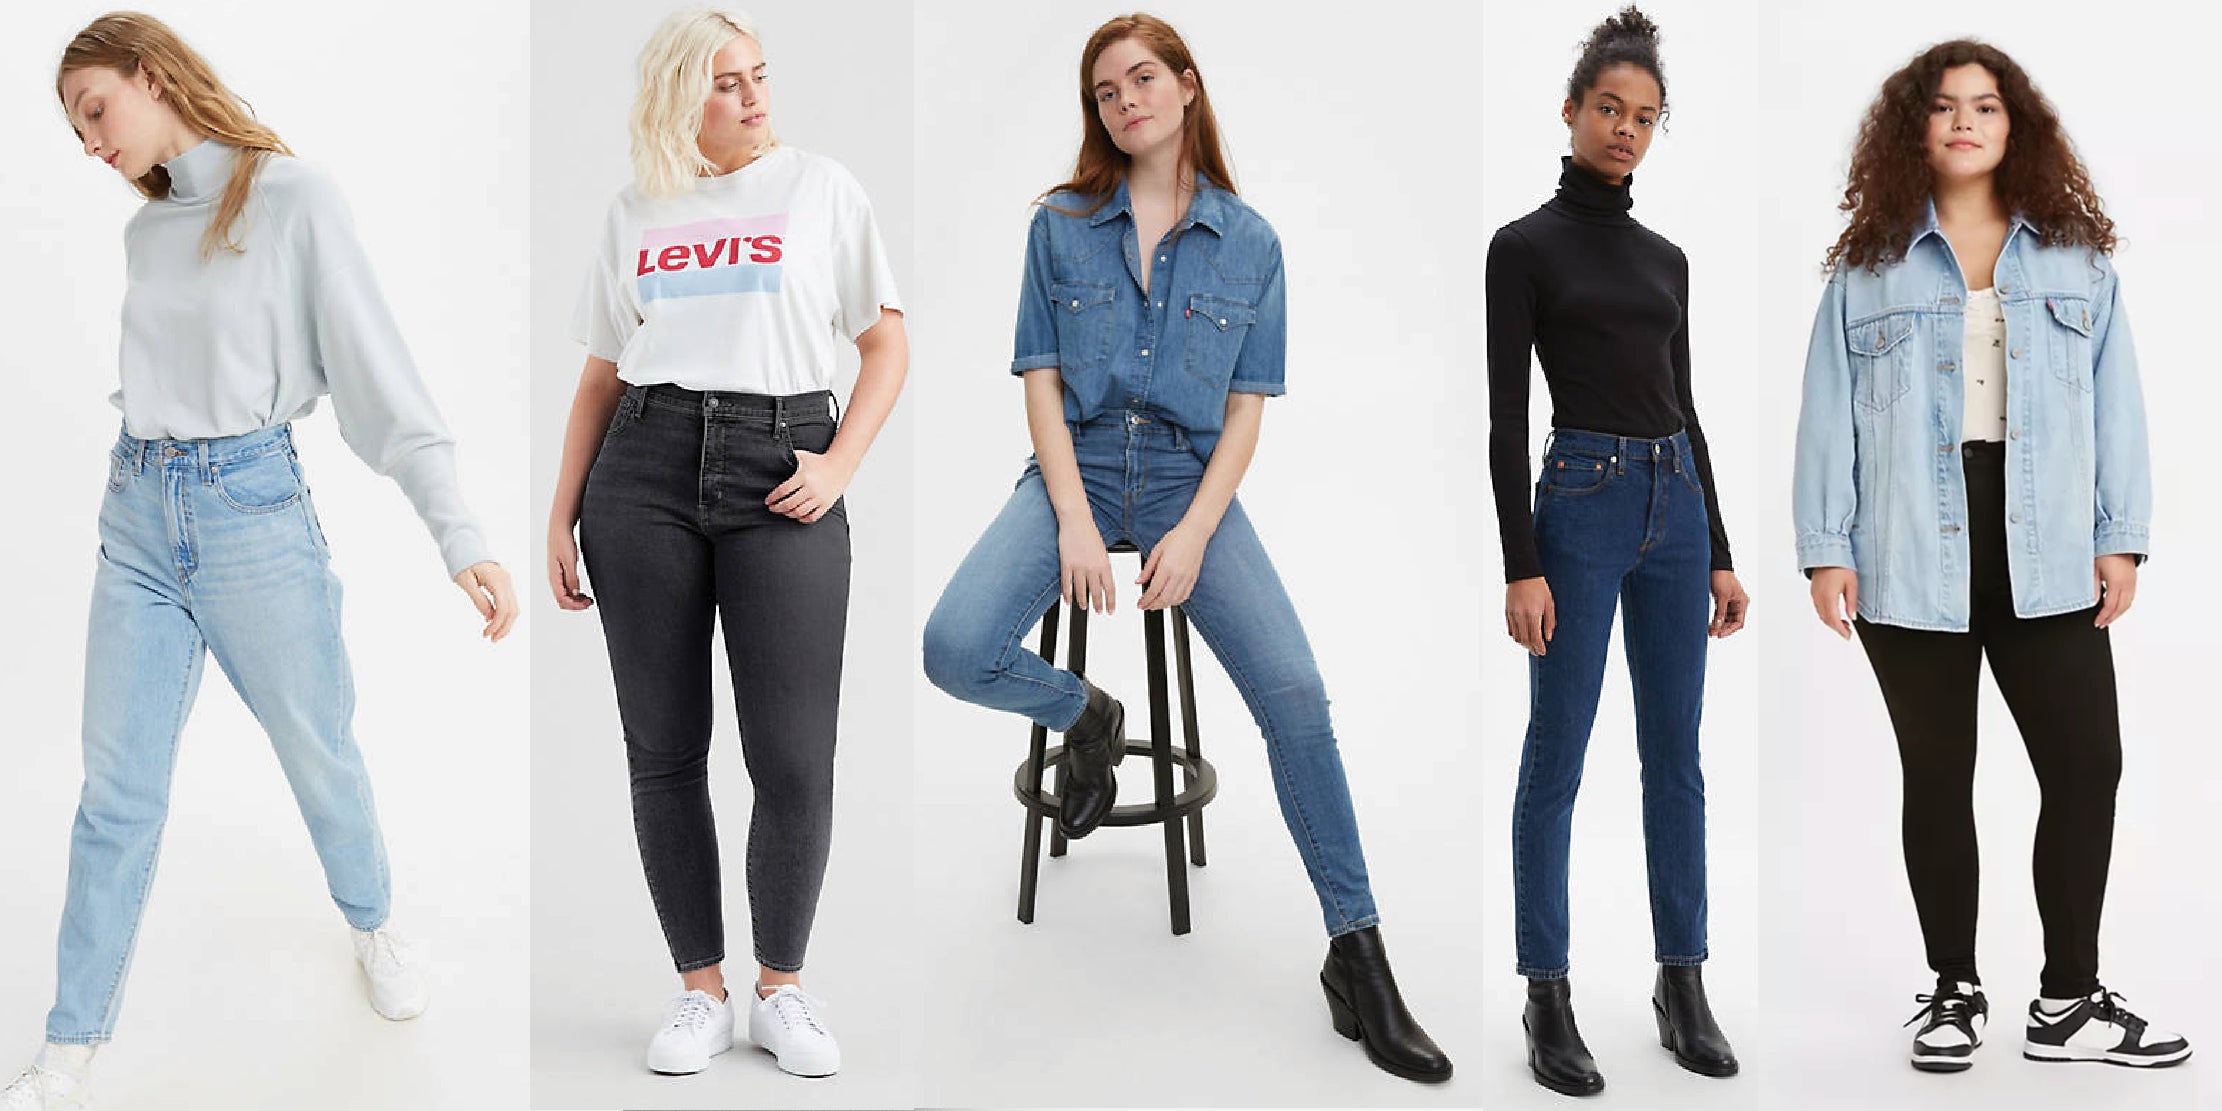 Levi's sizes to fit all body shapes